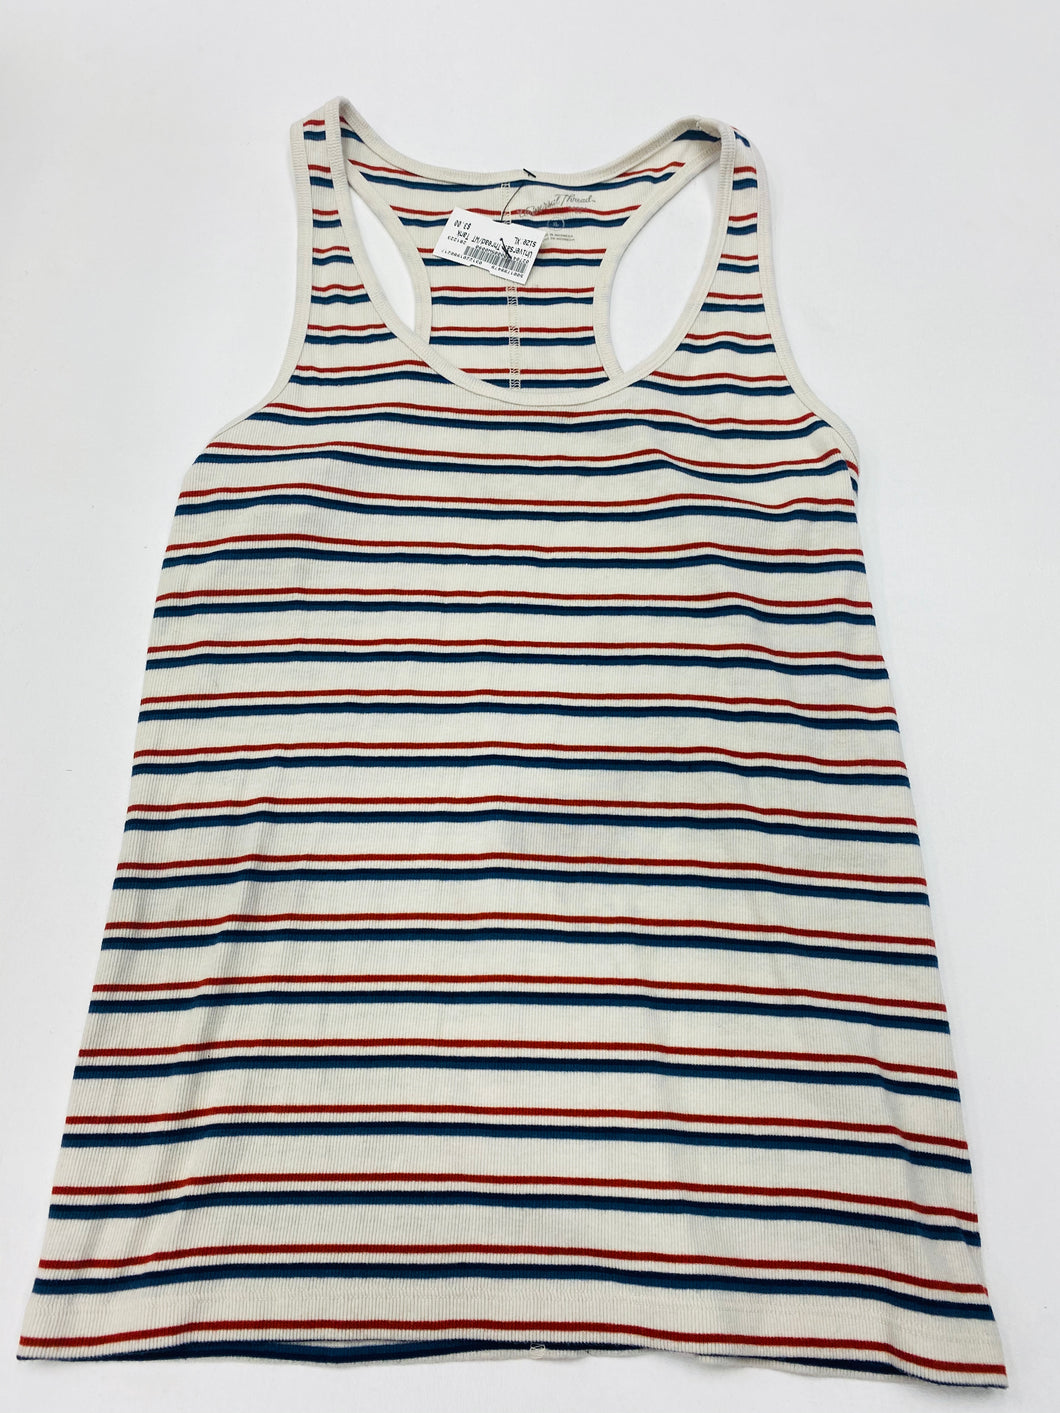 Universal Thread Tank Top Size Extra Large